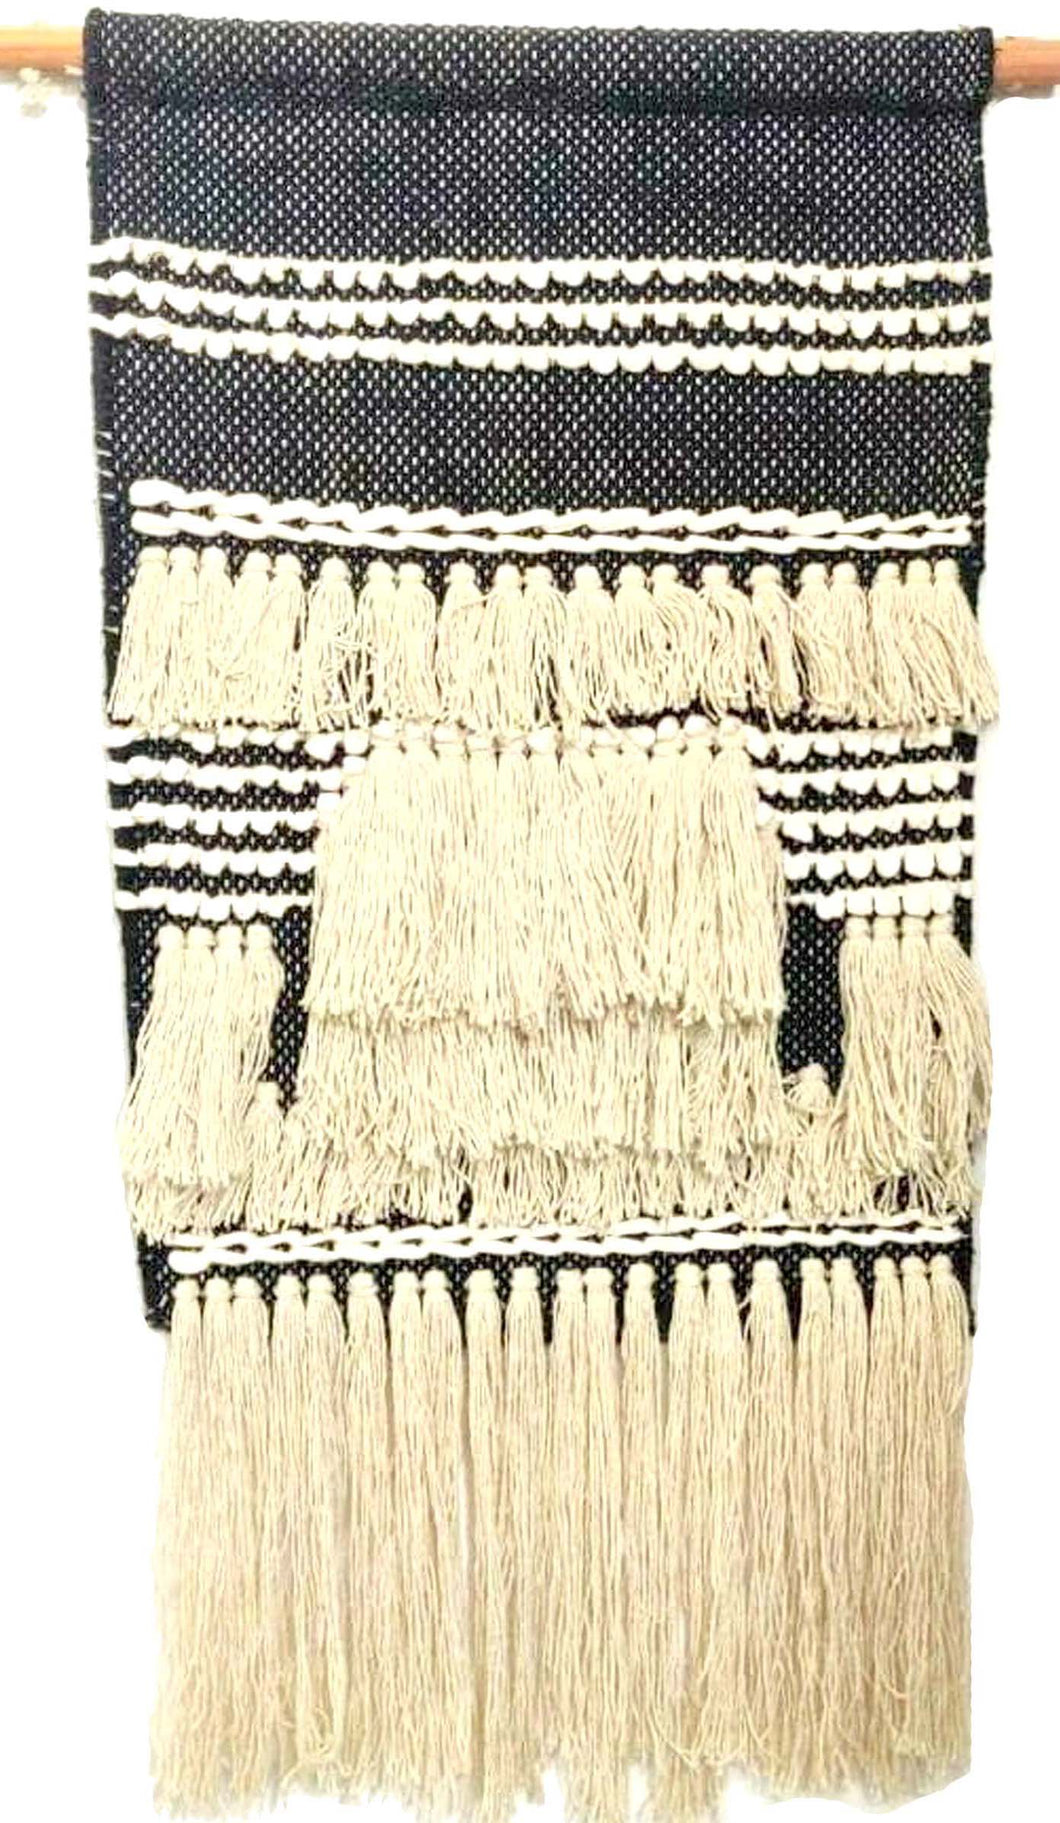 Black woven wall hangings with cream tassels 35 cm wide x 70 cm